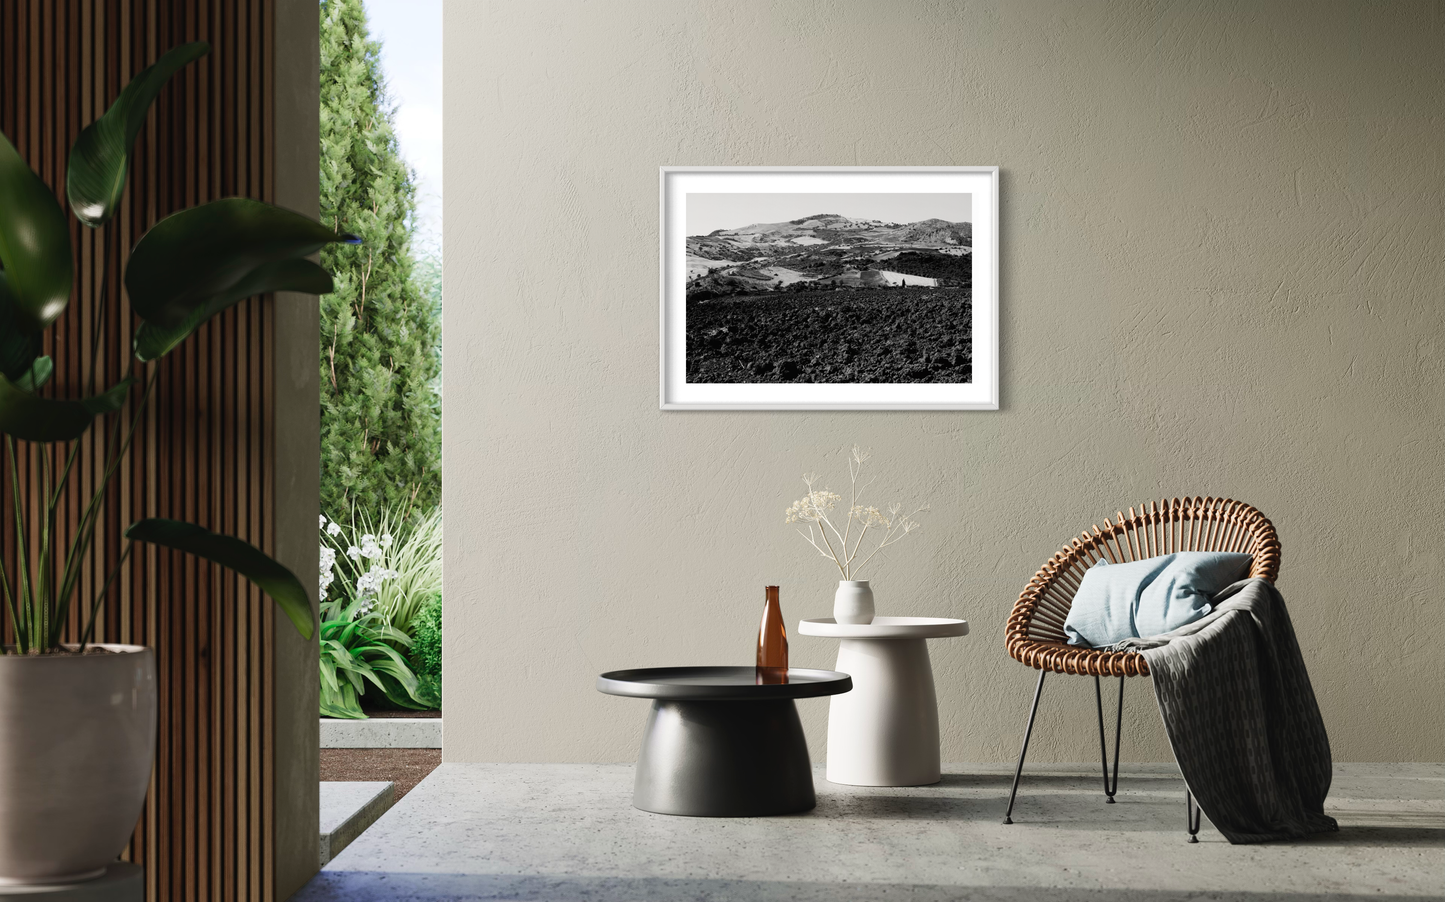 Countryside view, Tursi - Giclée print on Hahnemühle German Etching paper